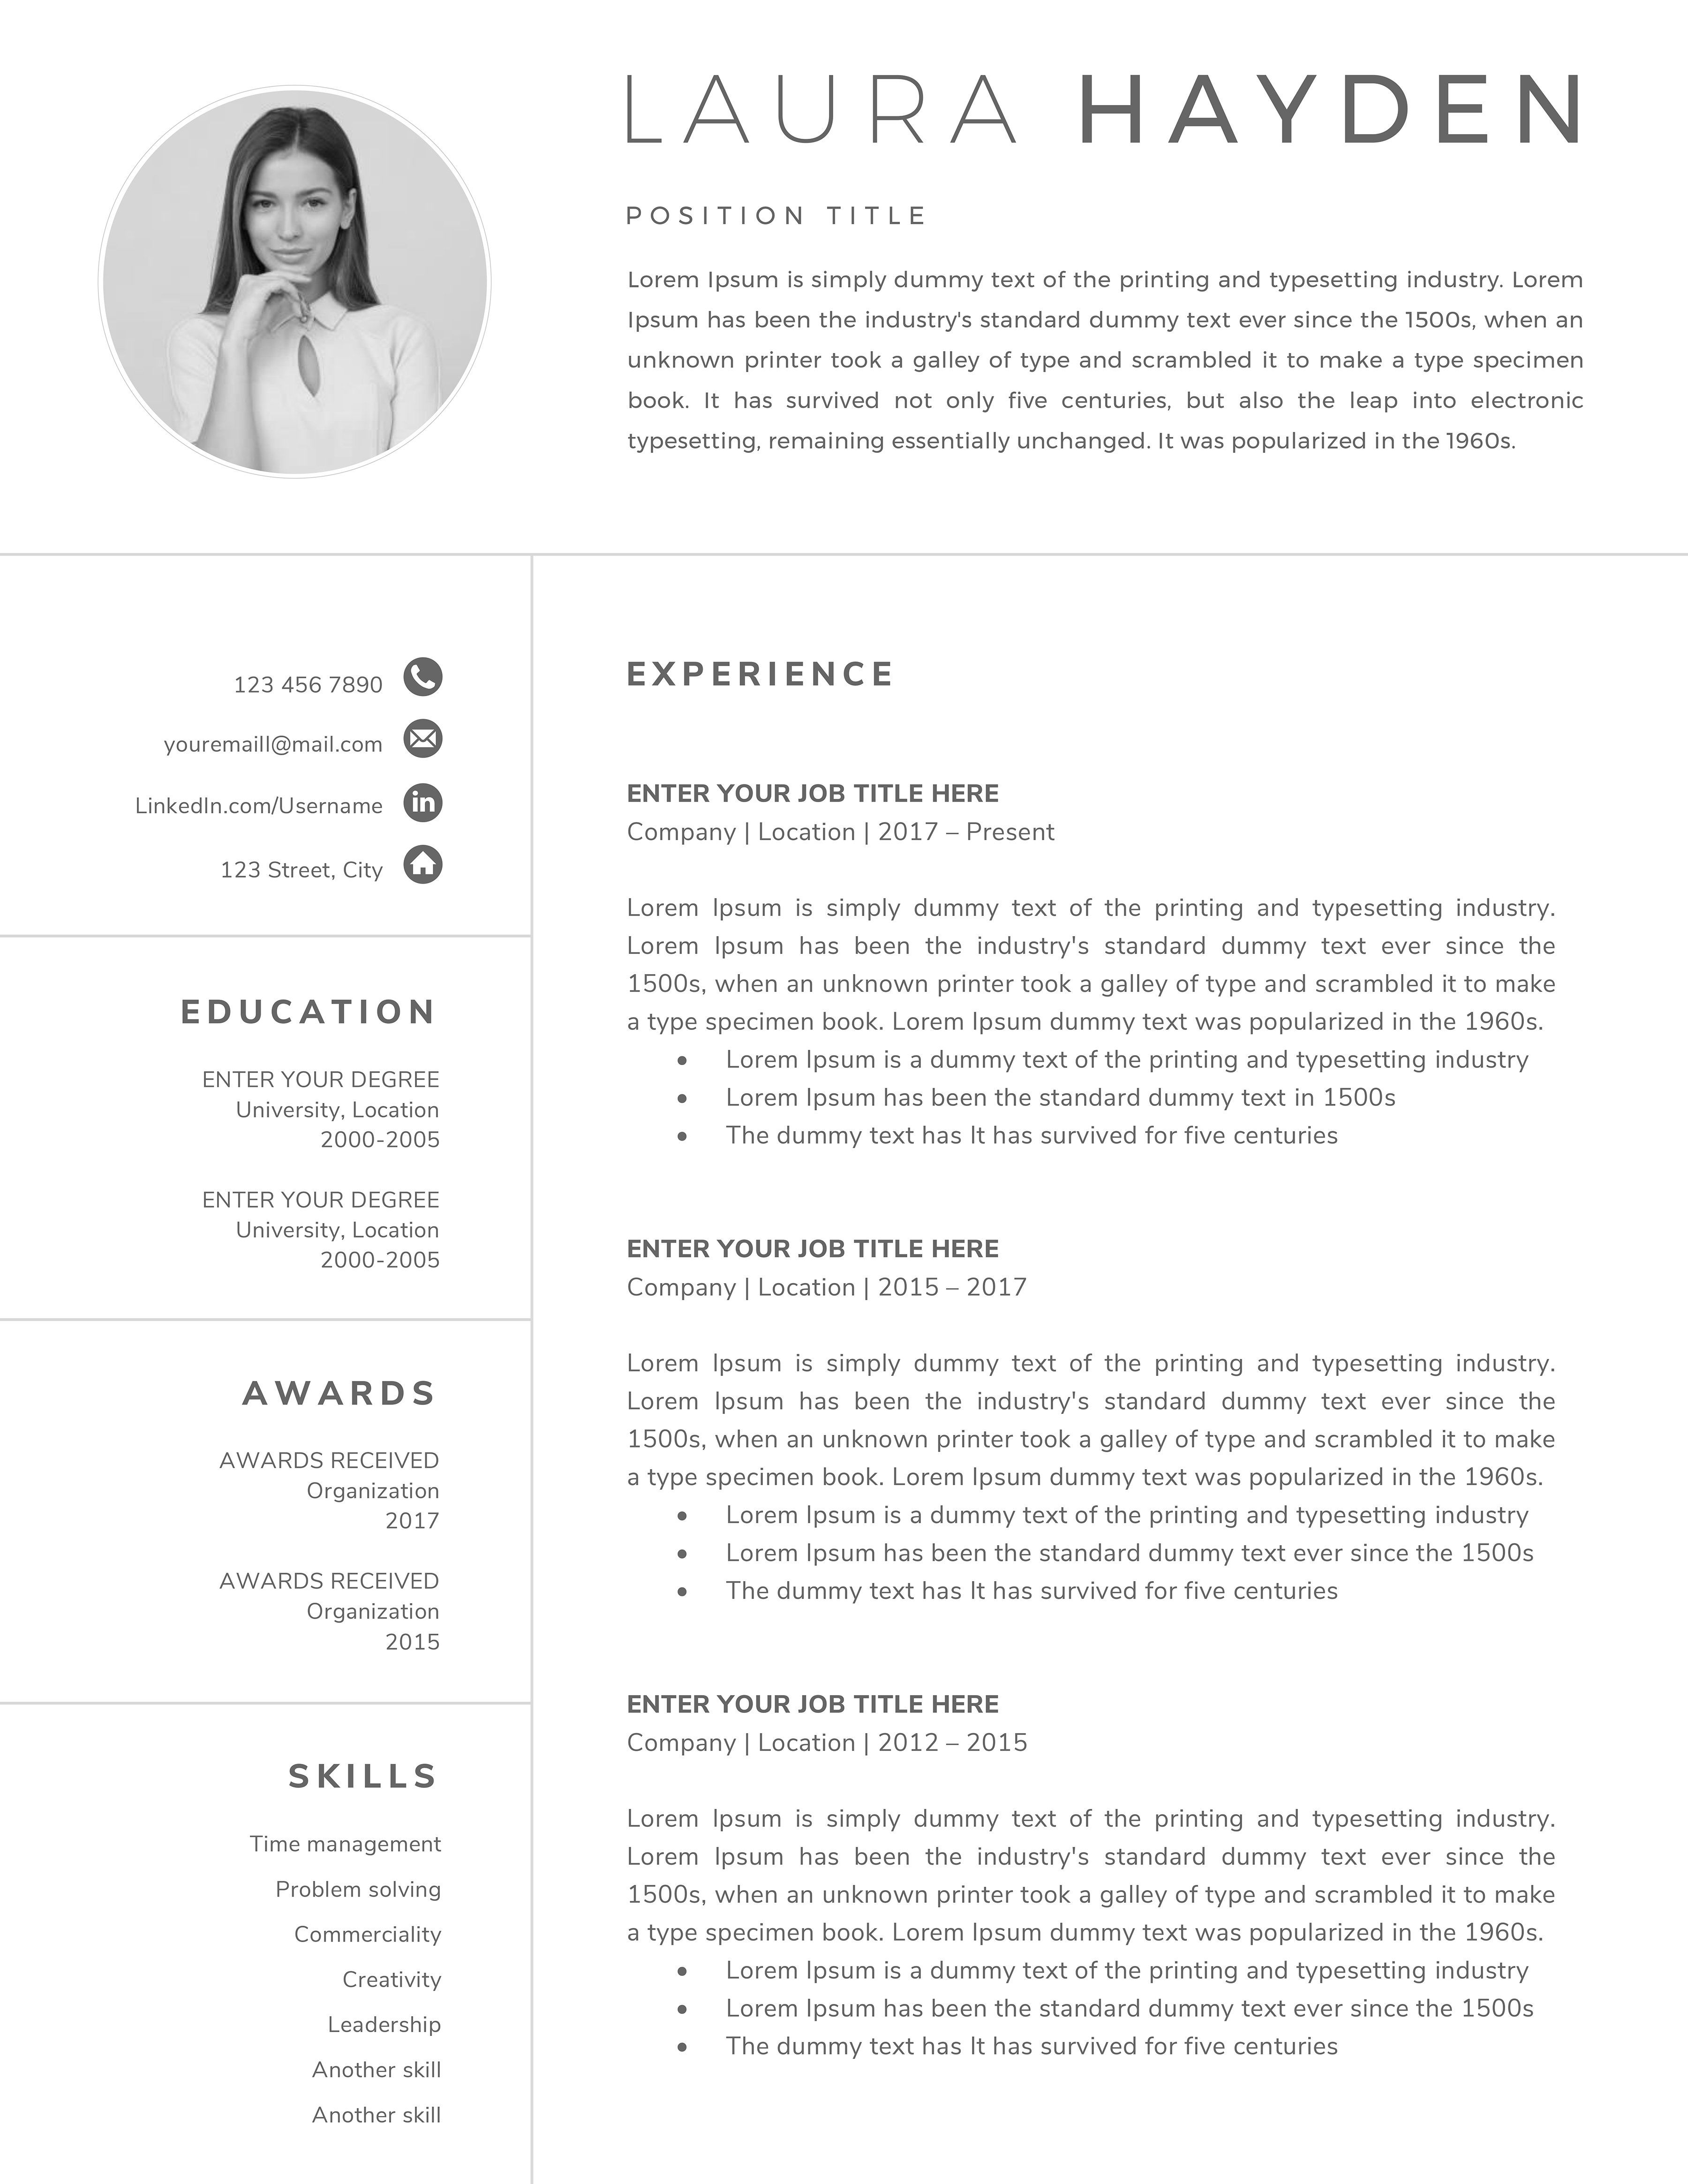 Professional resume template with a photo of a woman.